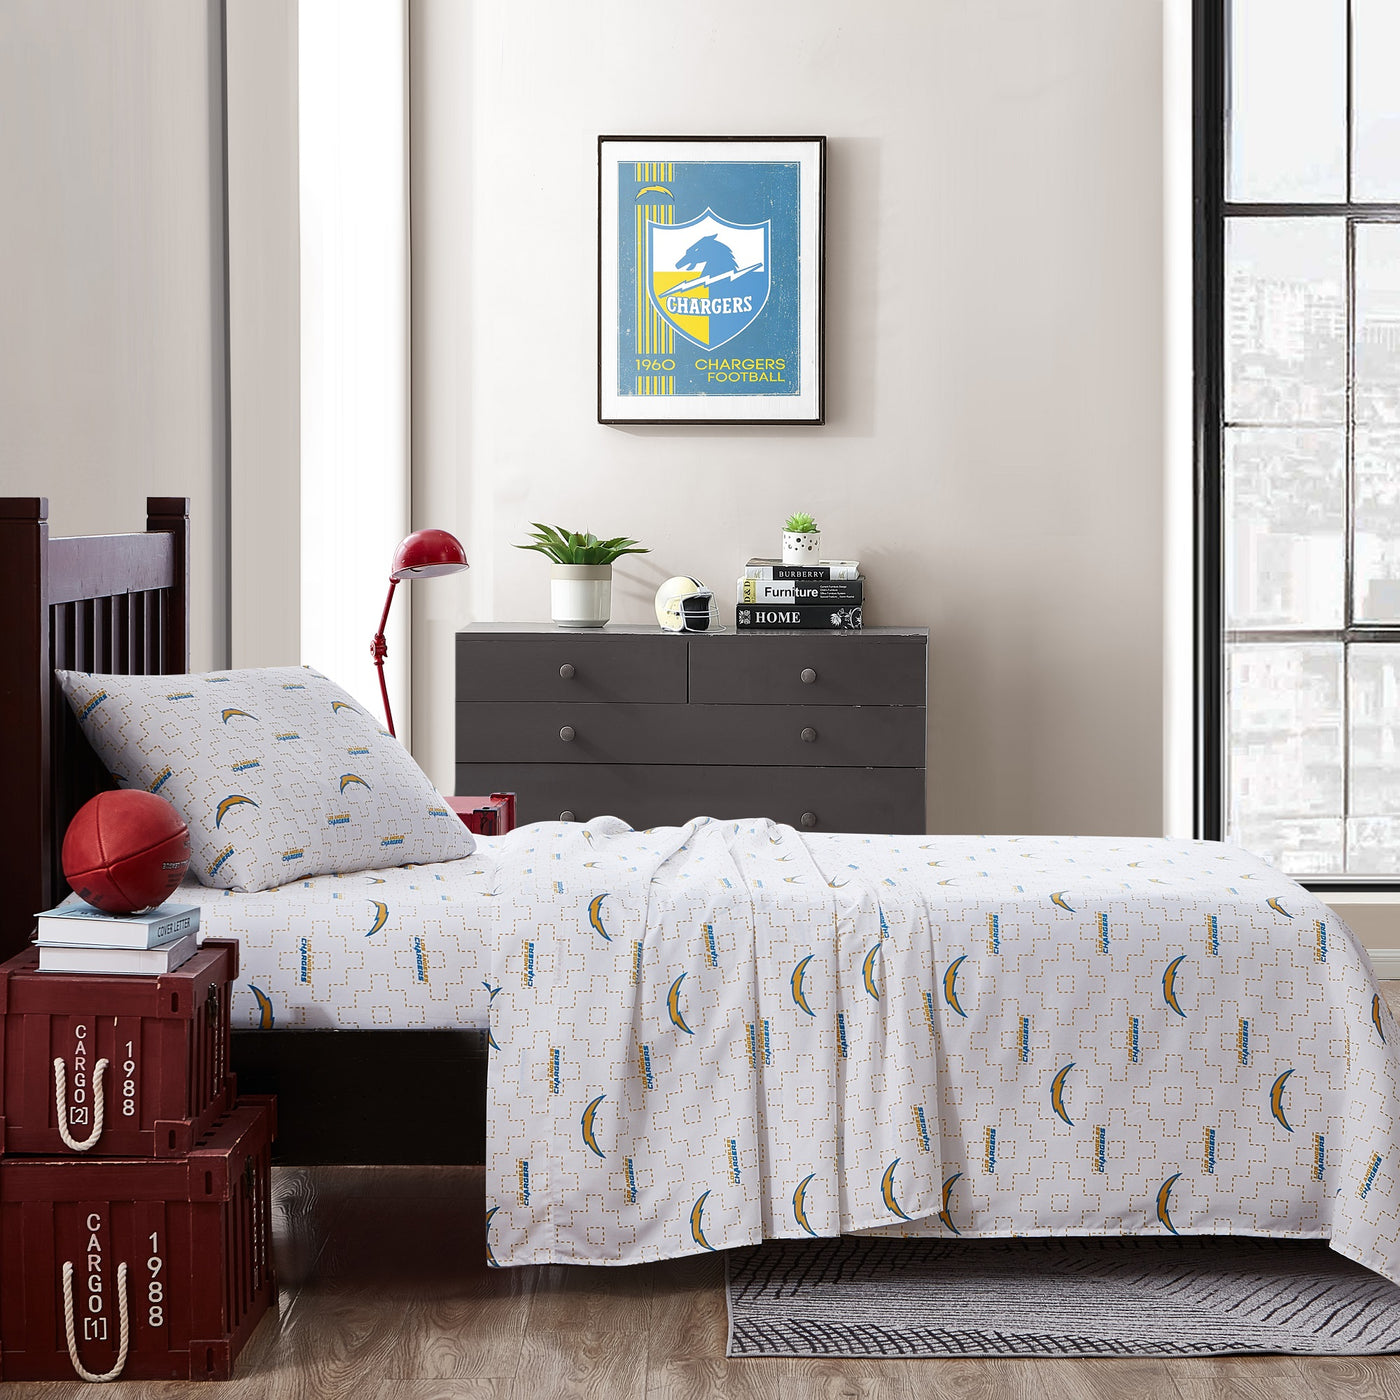 LA Chargers Scatter Sheet Set Twin